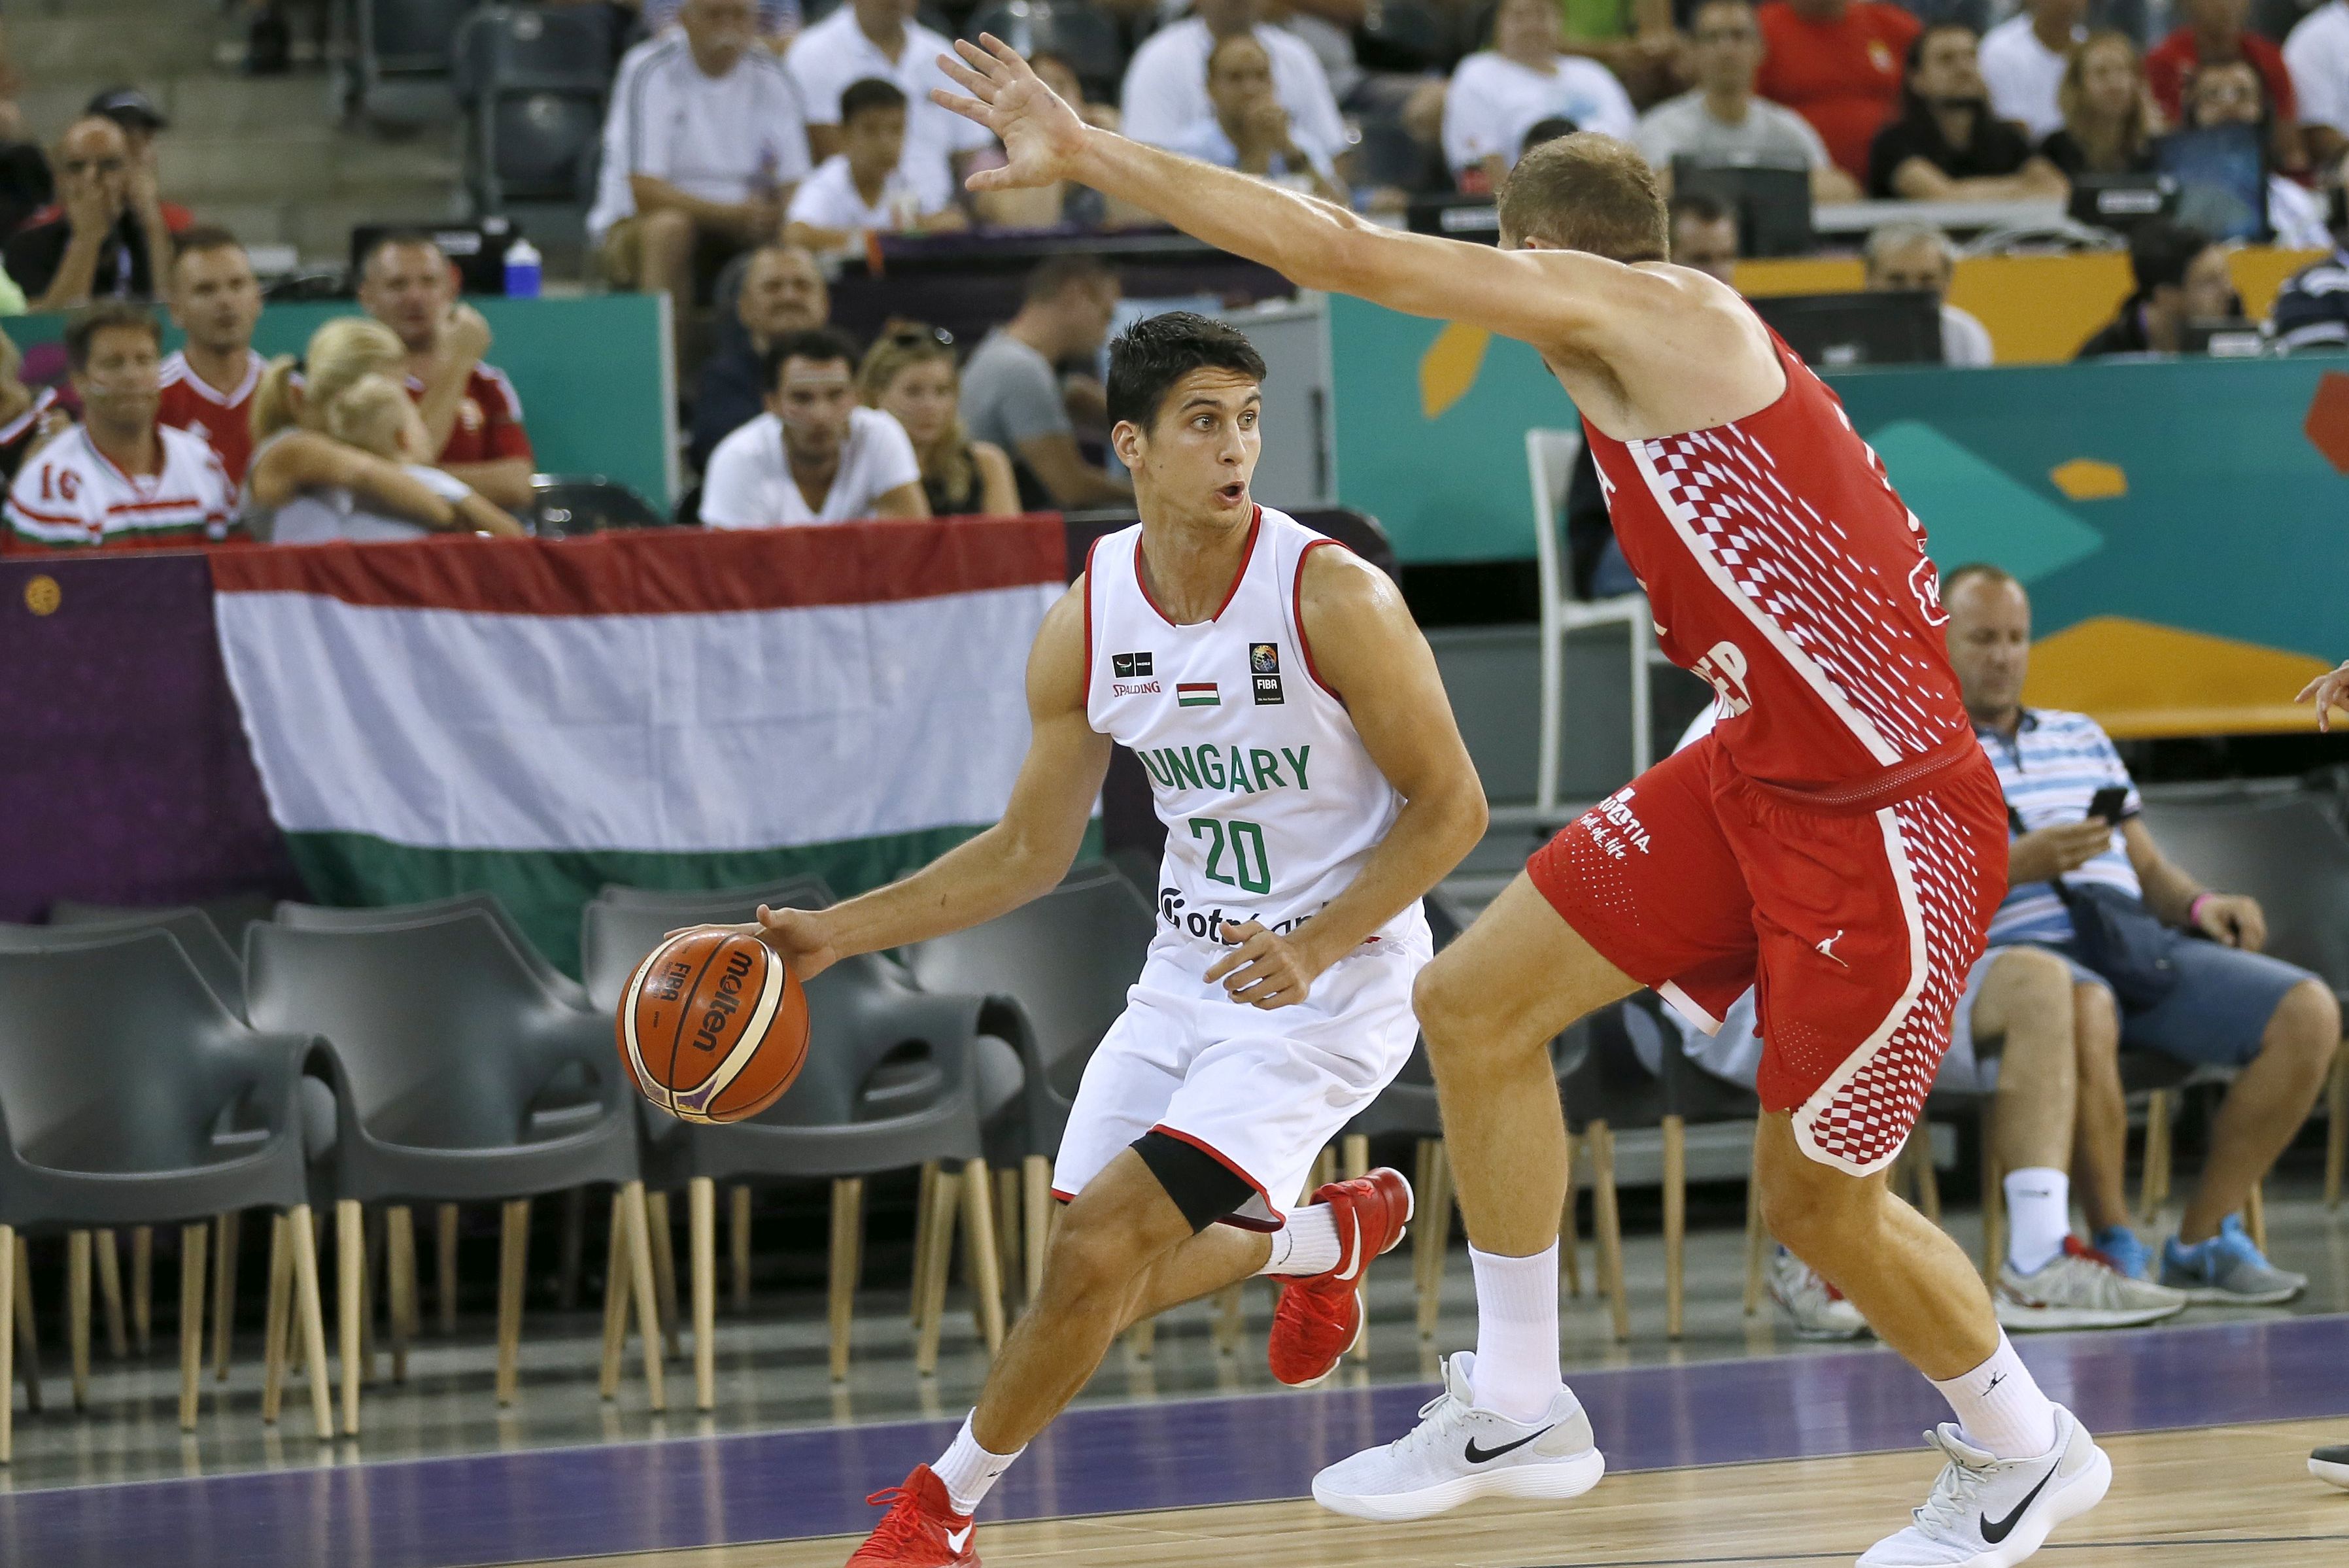 epa06176809 Hugary's Zoltan Perl (L) in action with Luka Zoric (R) of Croatia during the EuroBasket 2017 group C match between Hungary and Croatia, in Cluj Napoca, Romania, 01 September 2017.  EPA/ROBERT GHEMENT